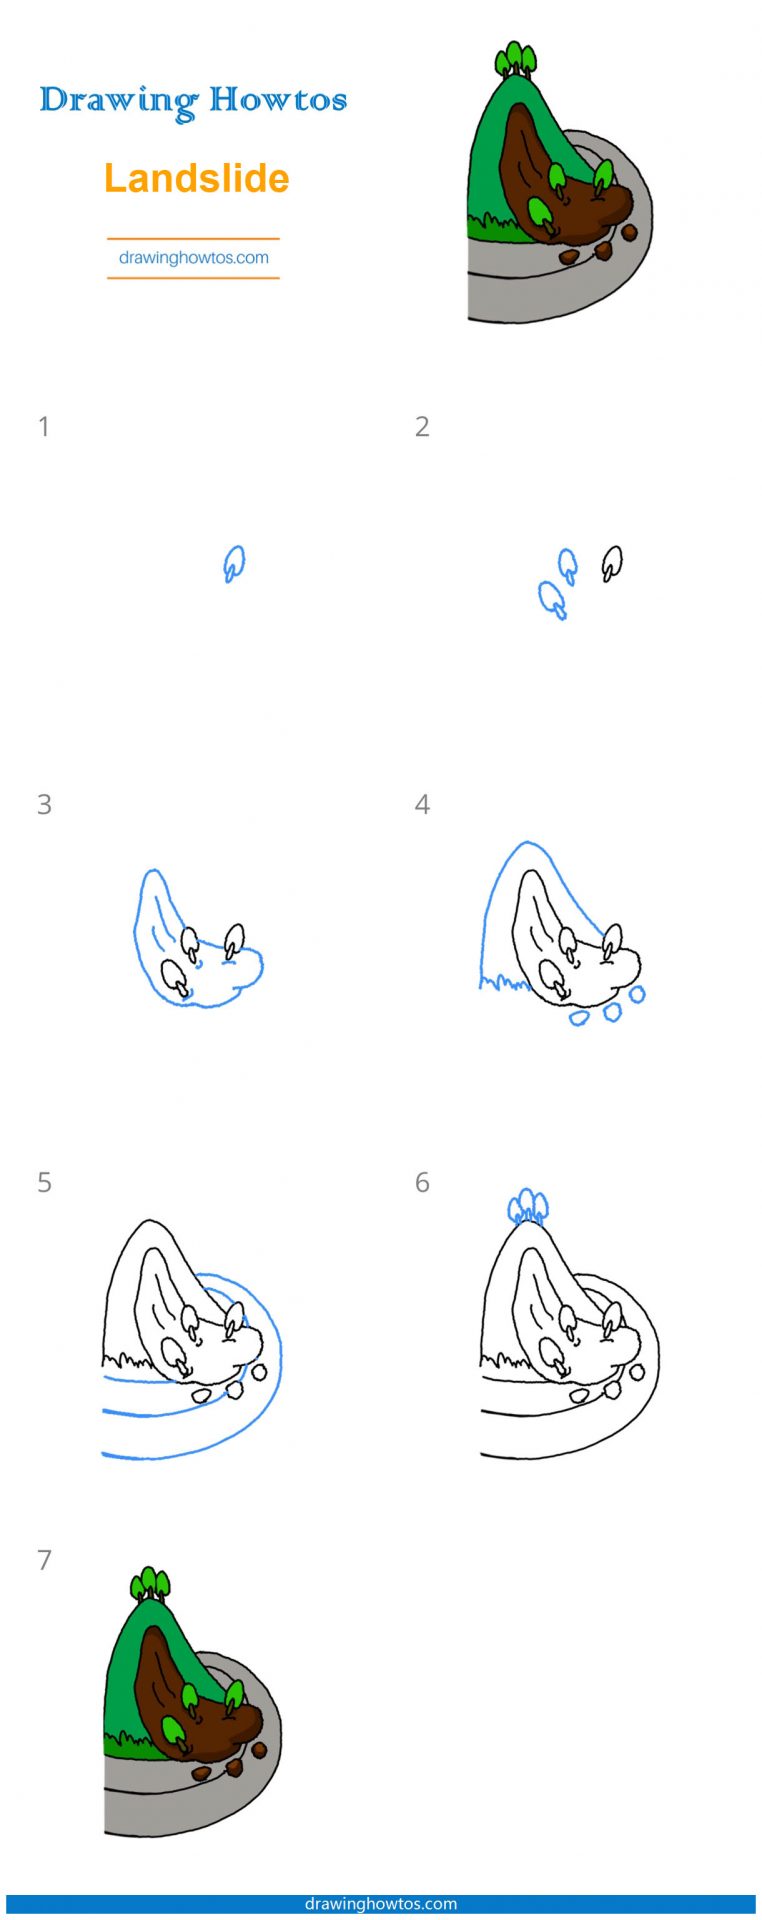 How to Draw a Landslide Step by Step